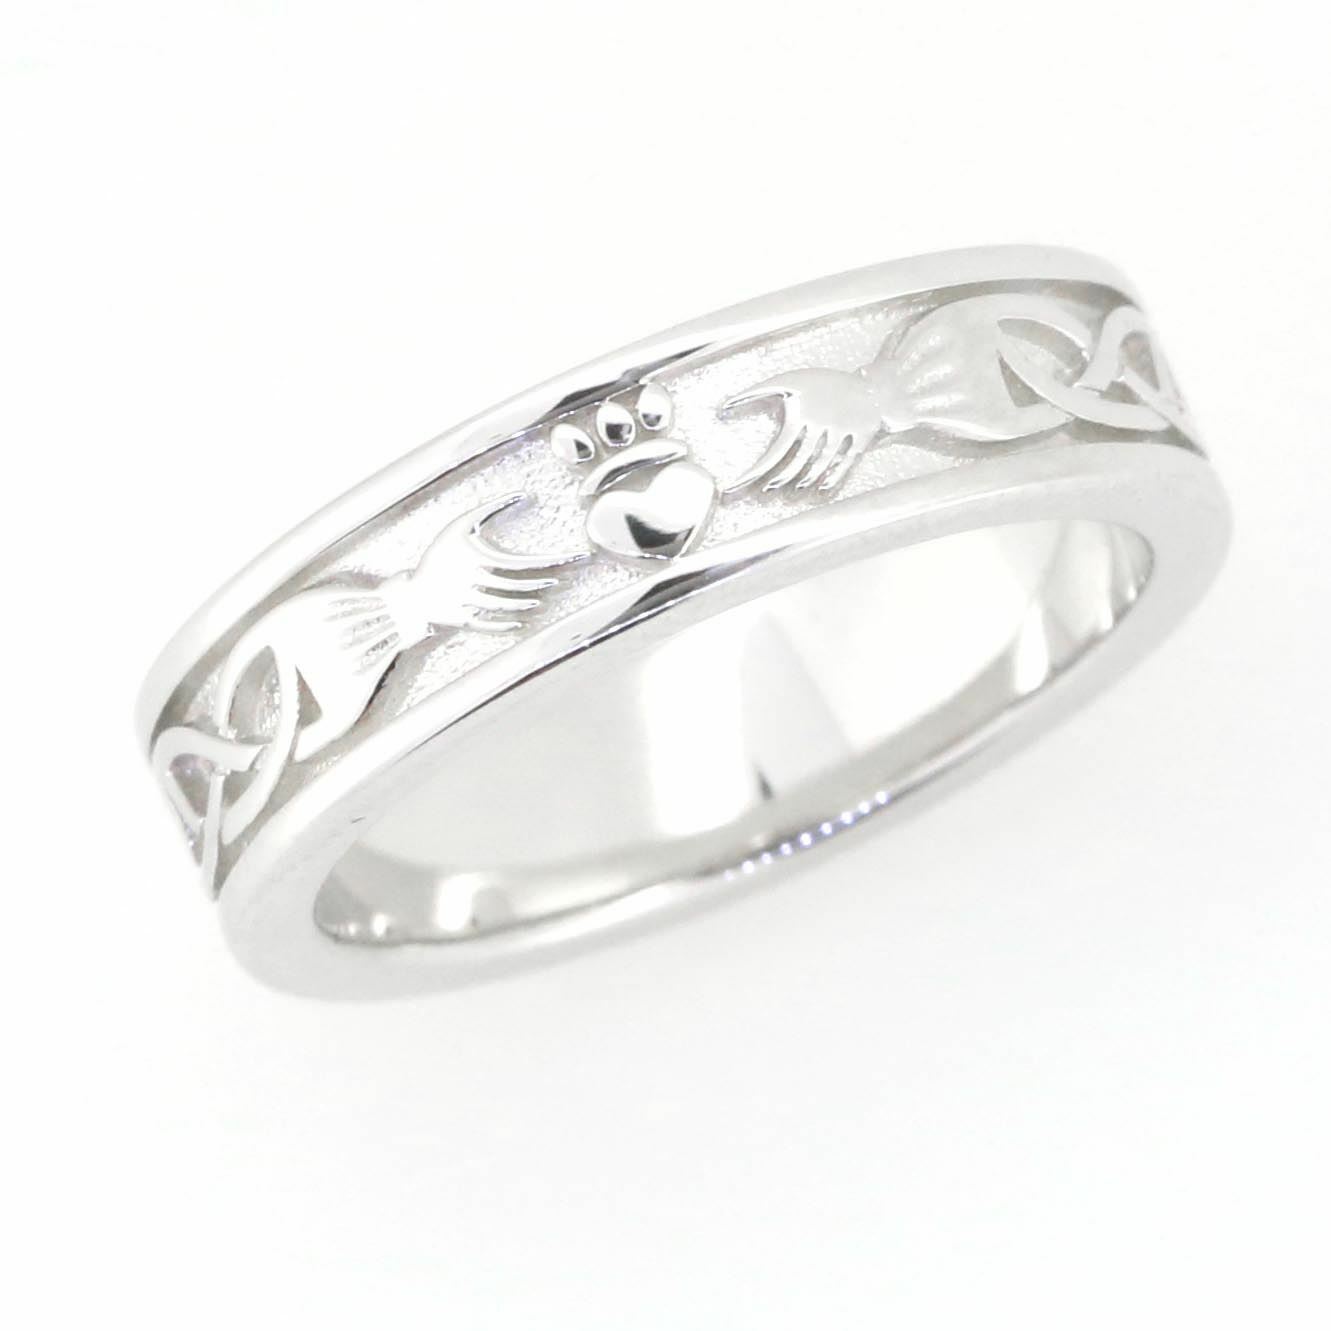 14K White Gold 5 mm Claddagh Band Celtic Knot Ring